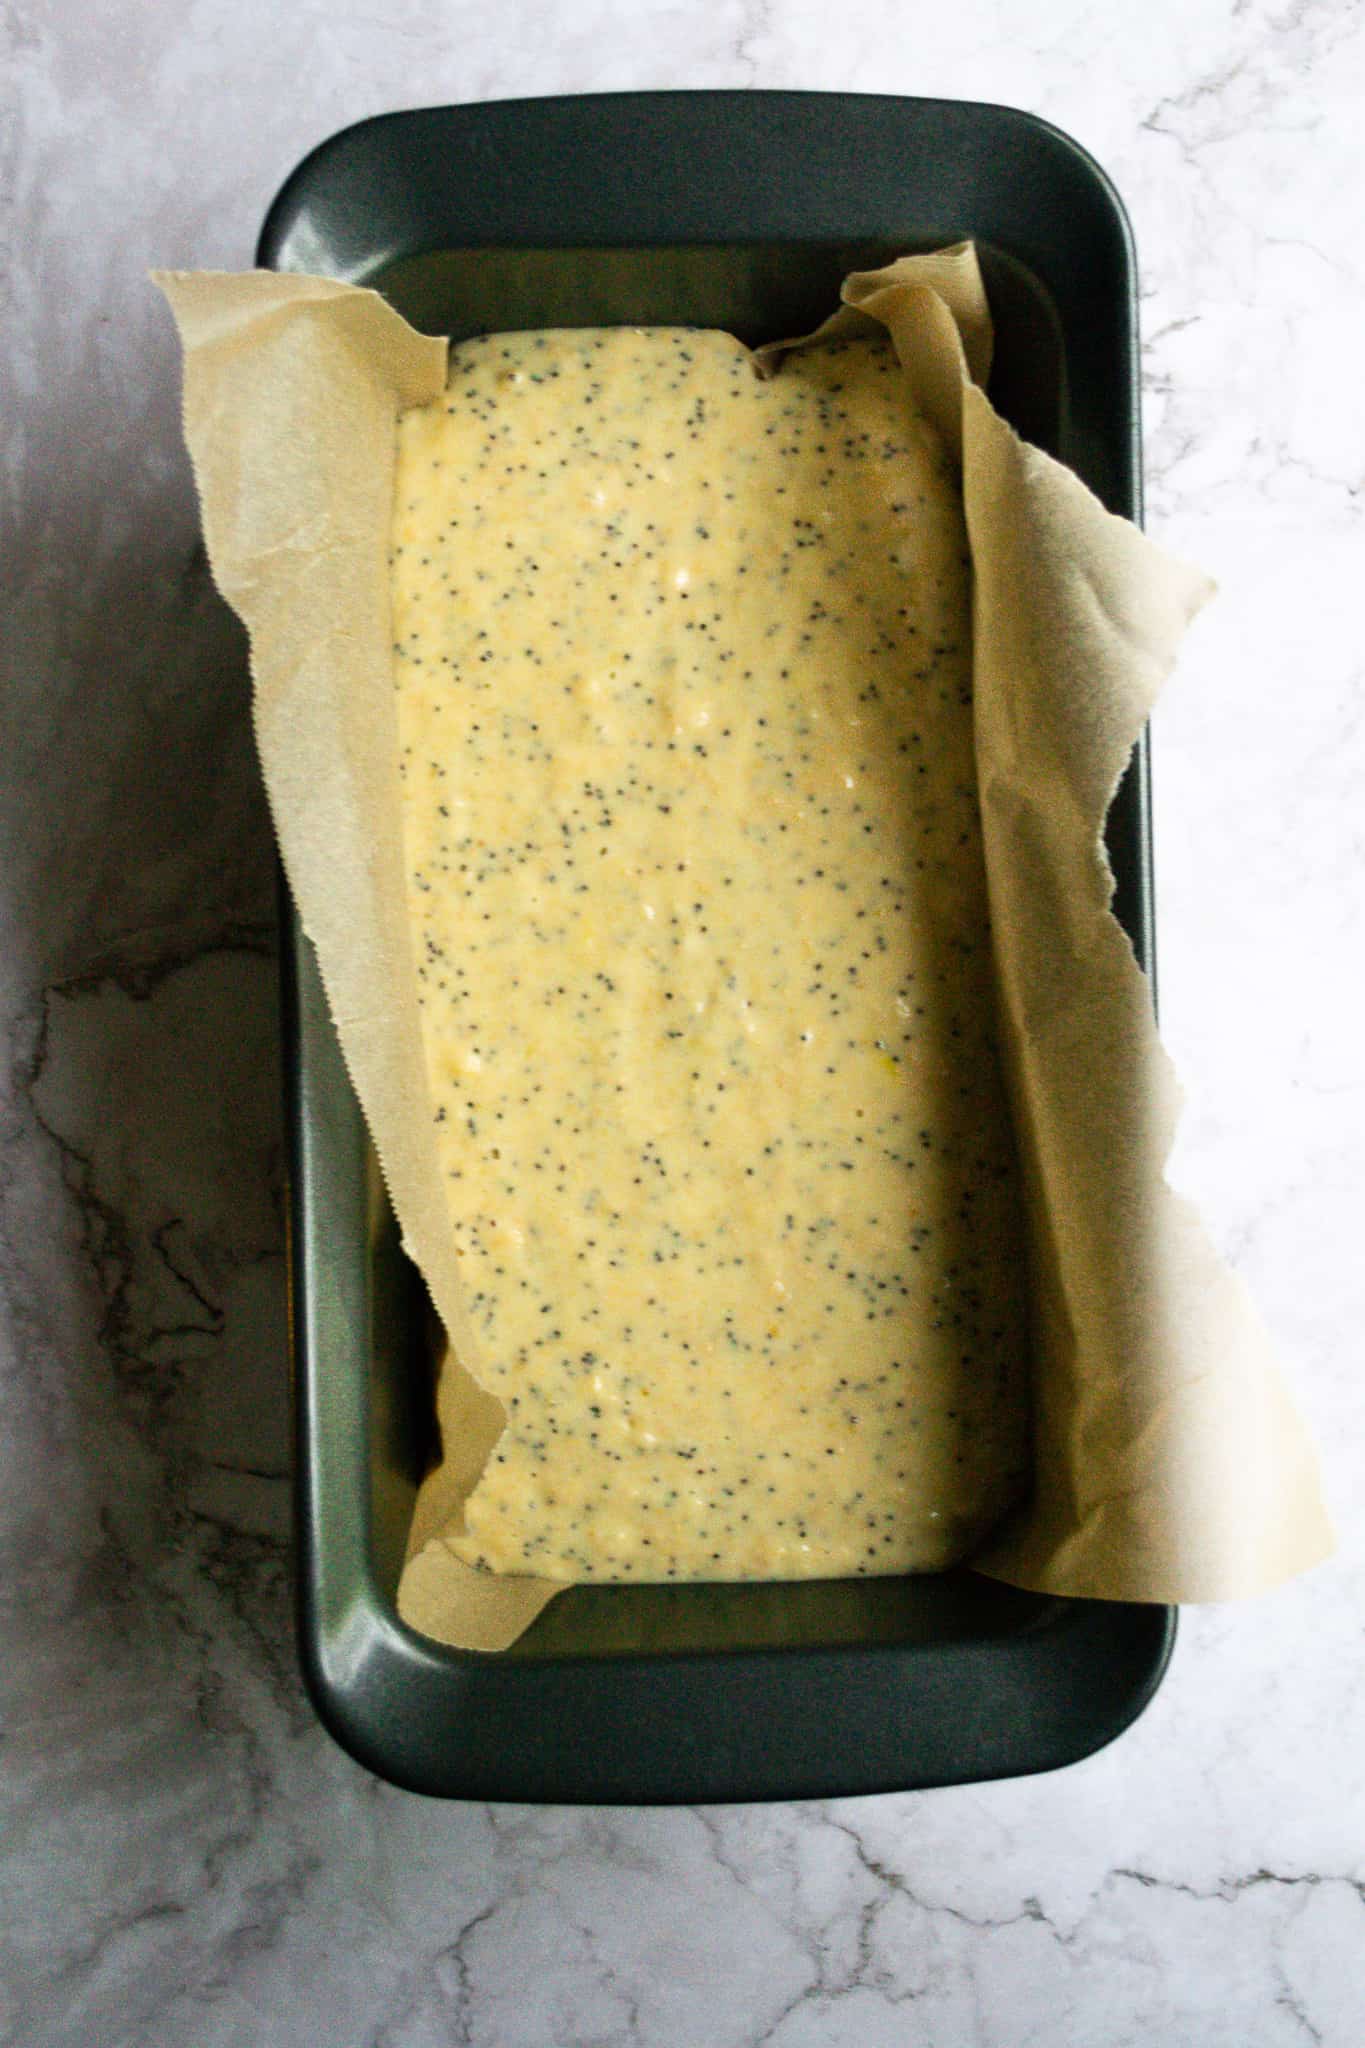 Orange poppyseed loaf batter in a pan with baking paper.